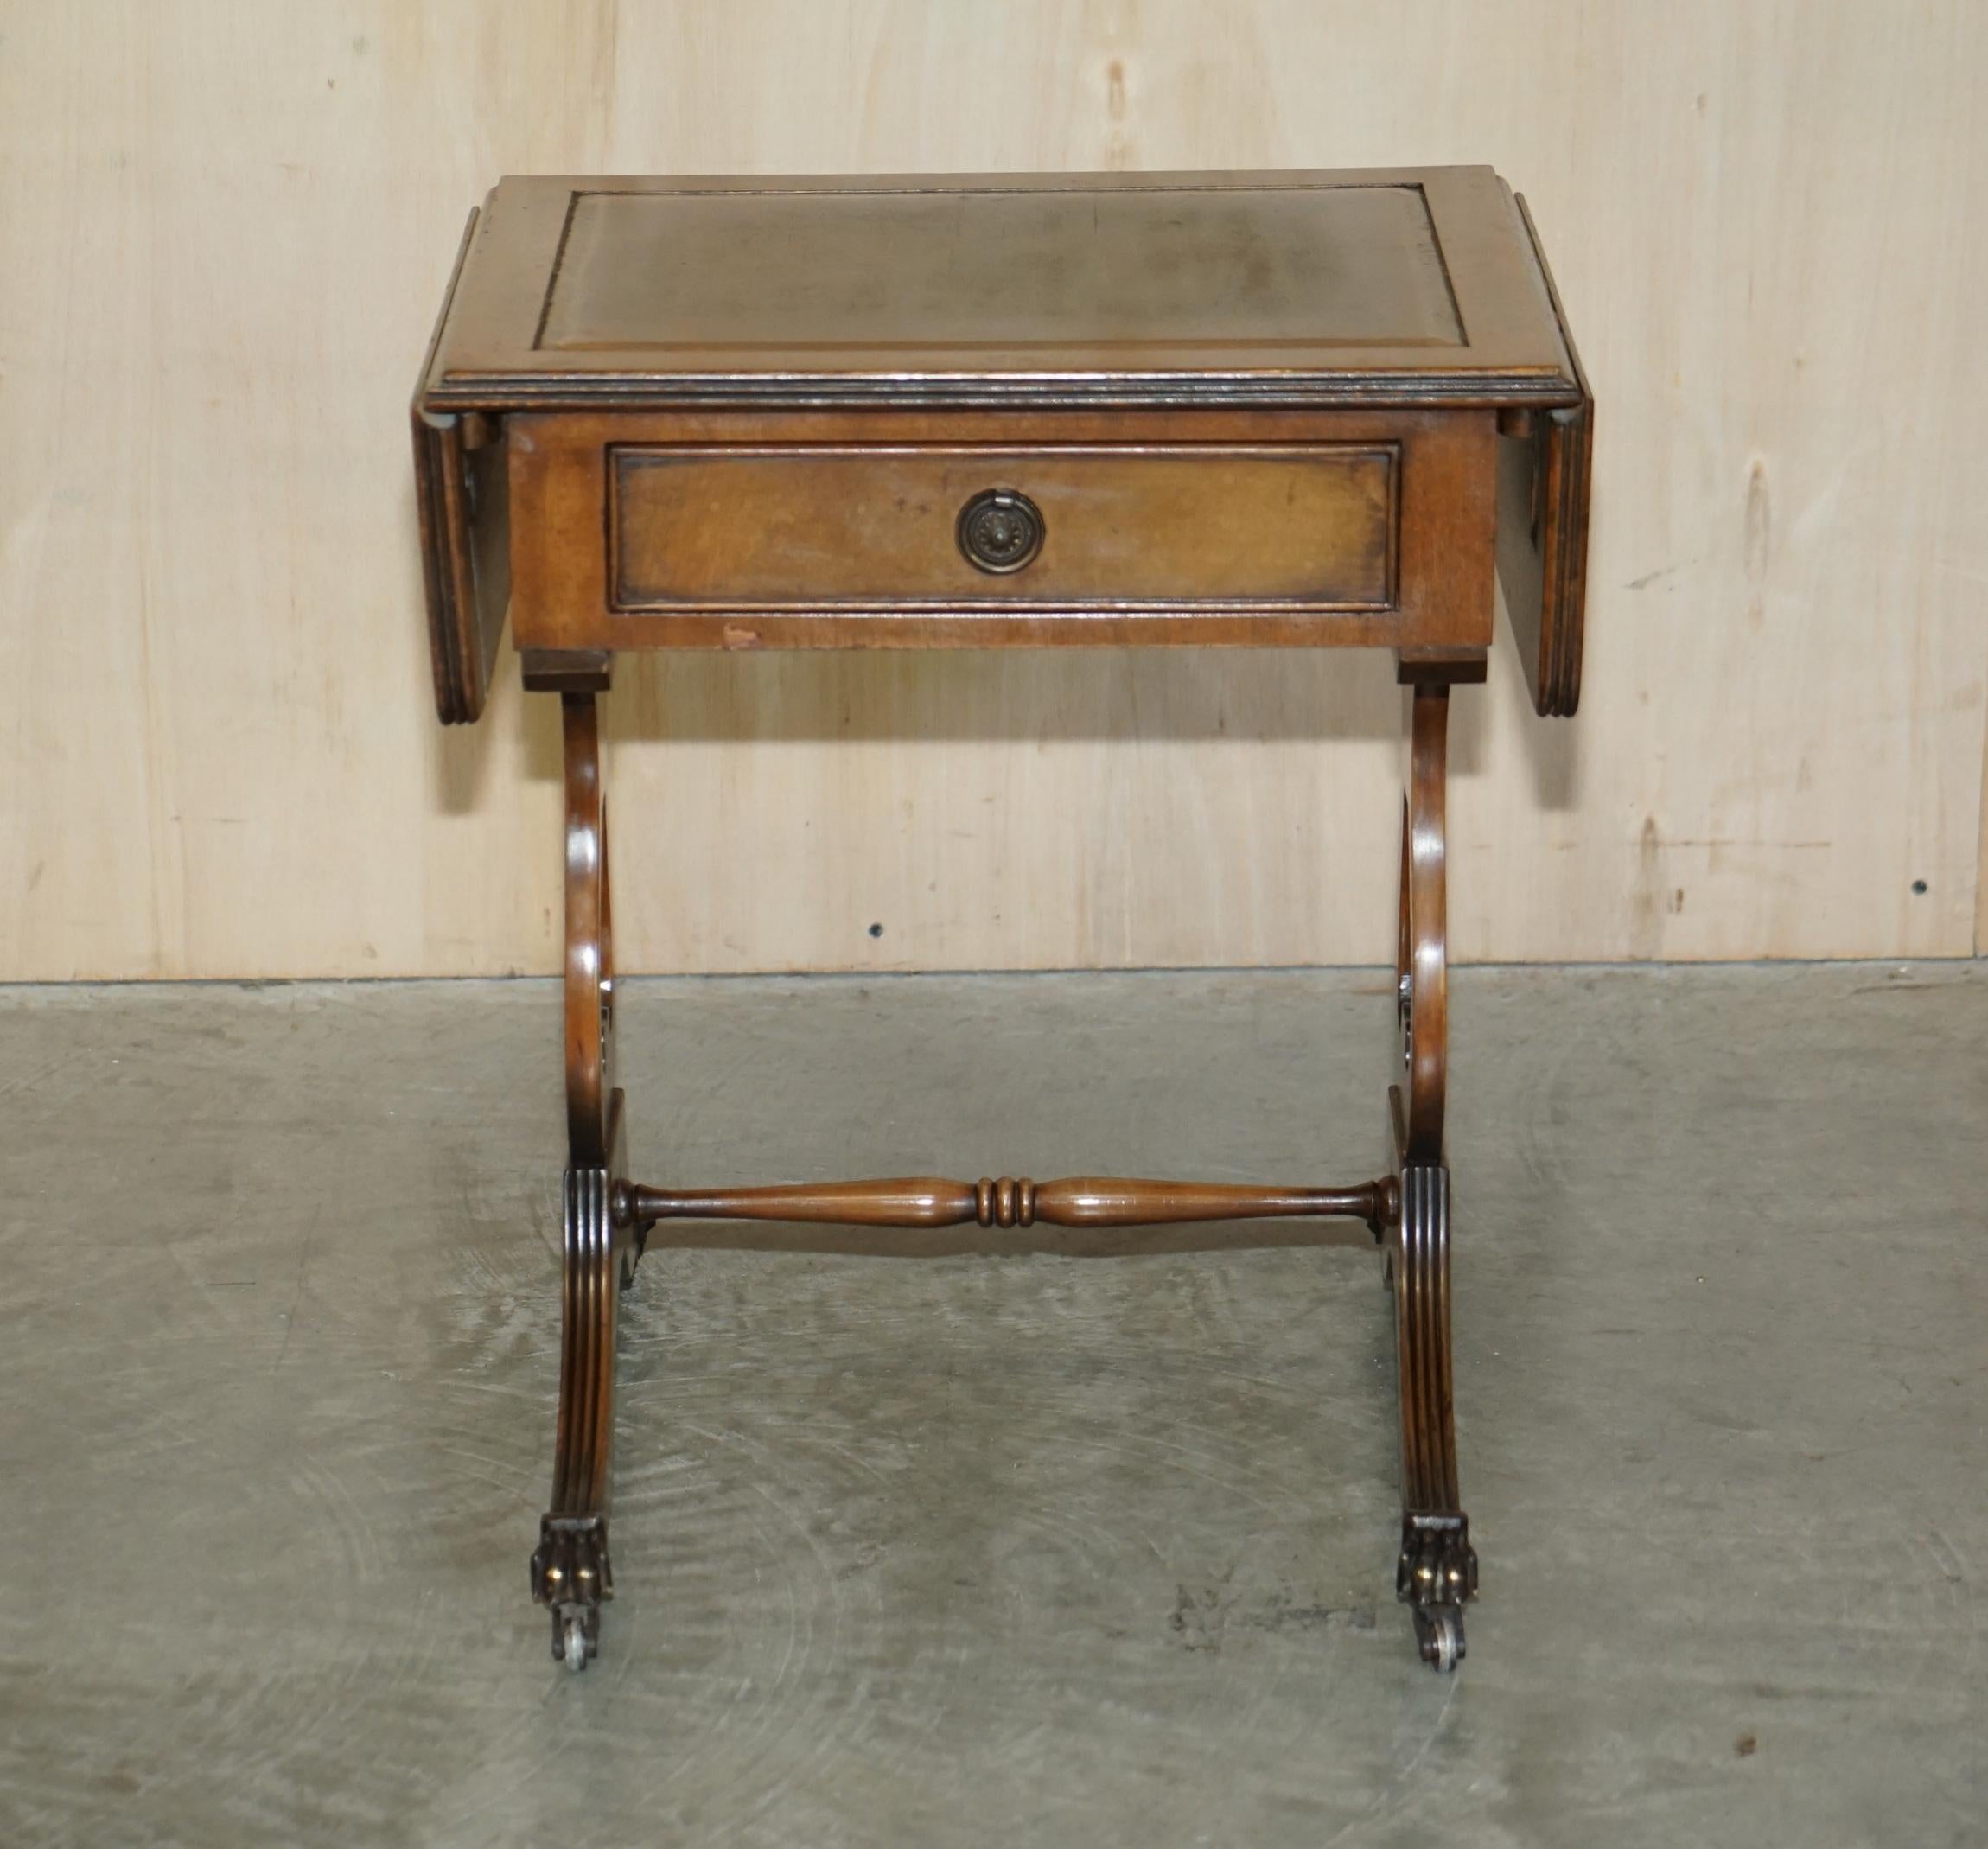 We are delighted to offer for sale this lovely Bevan Funnell vintage Mahogany side table with extending brown leather top and single drawer.

A very good looking and versatile piece, the table has single drawer to the front, the middle top is wood